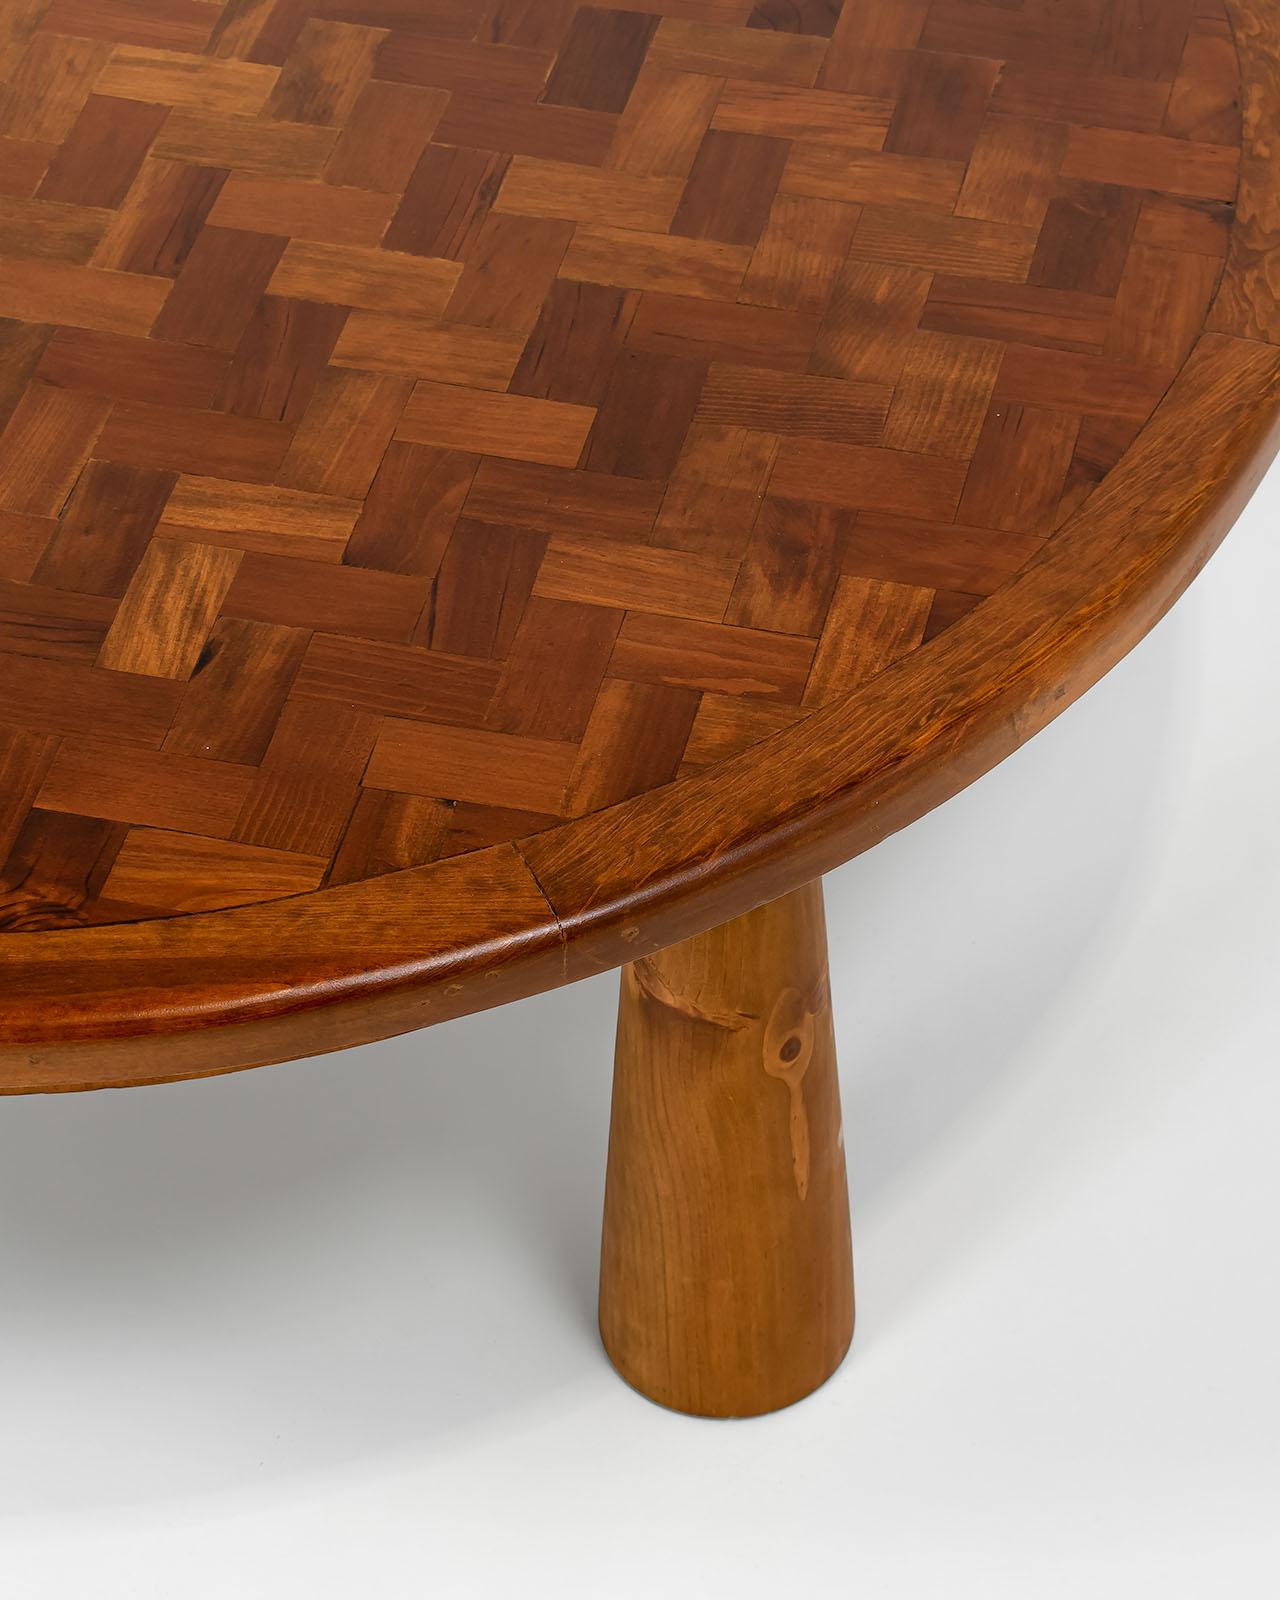 1950s, Large Round Parquet Coffee Table with Conical Legs, Spain 2